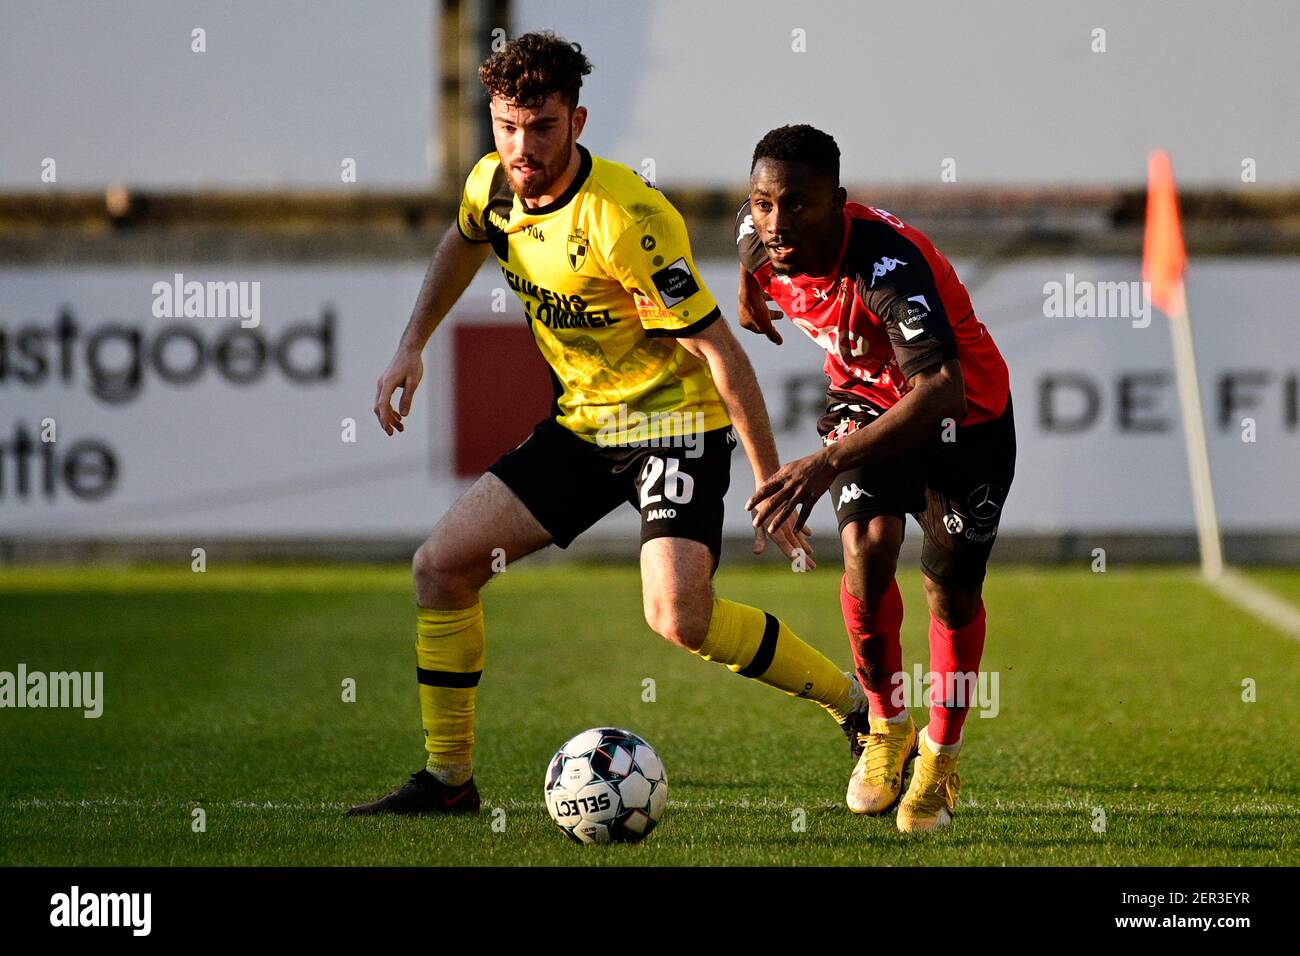 Lierse's Brent Laes and Seraing's Ablie Jallow fight for the ball during a soccer match between Lierse Kempenzonen and RFC Seraing, Sunday 28 February Stock Photo